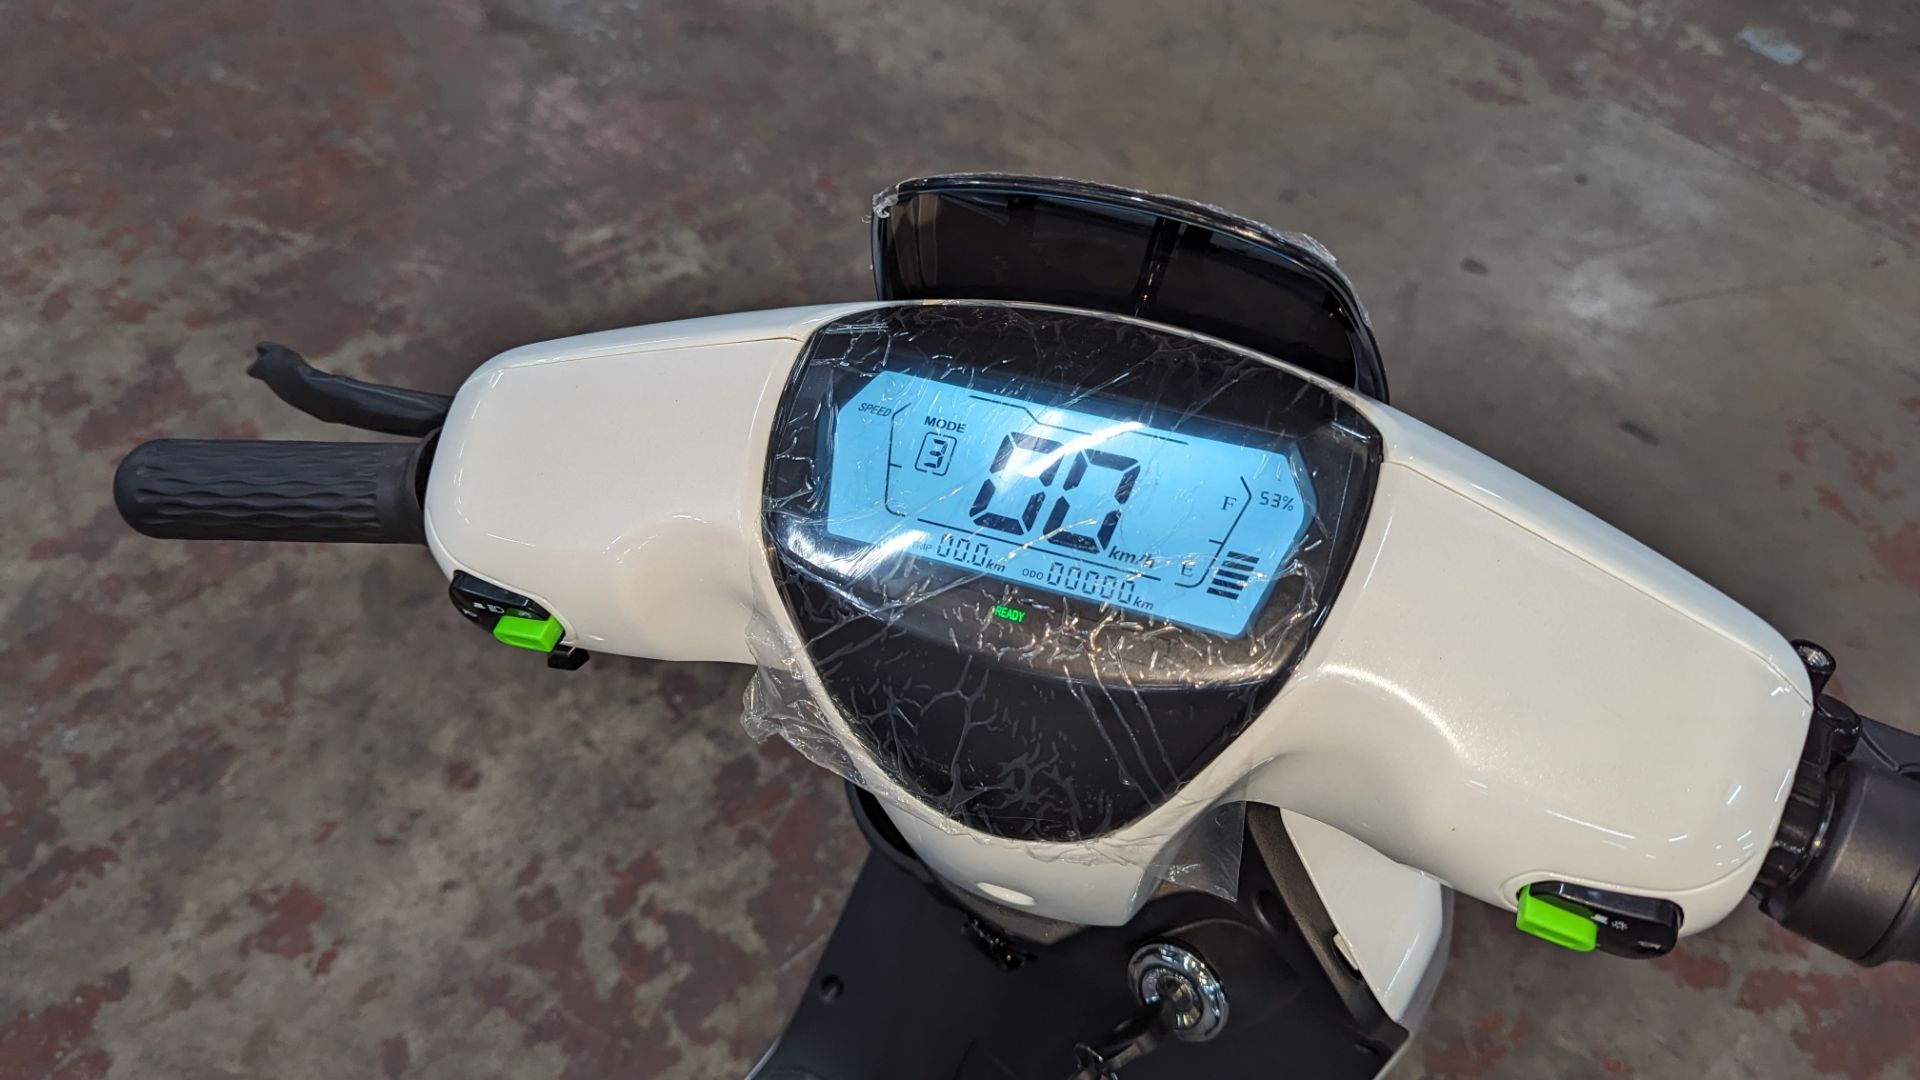 Model 18 Electric Bike: Zero (0) recorded miles, white body with black detailing, insulated box moun - Image 11 of 15